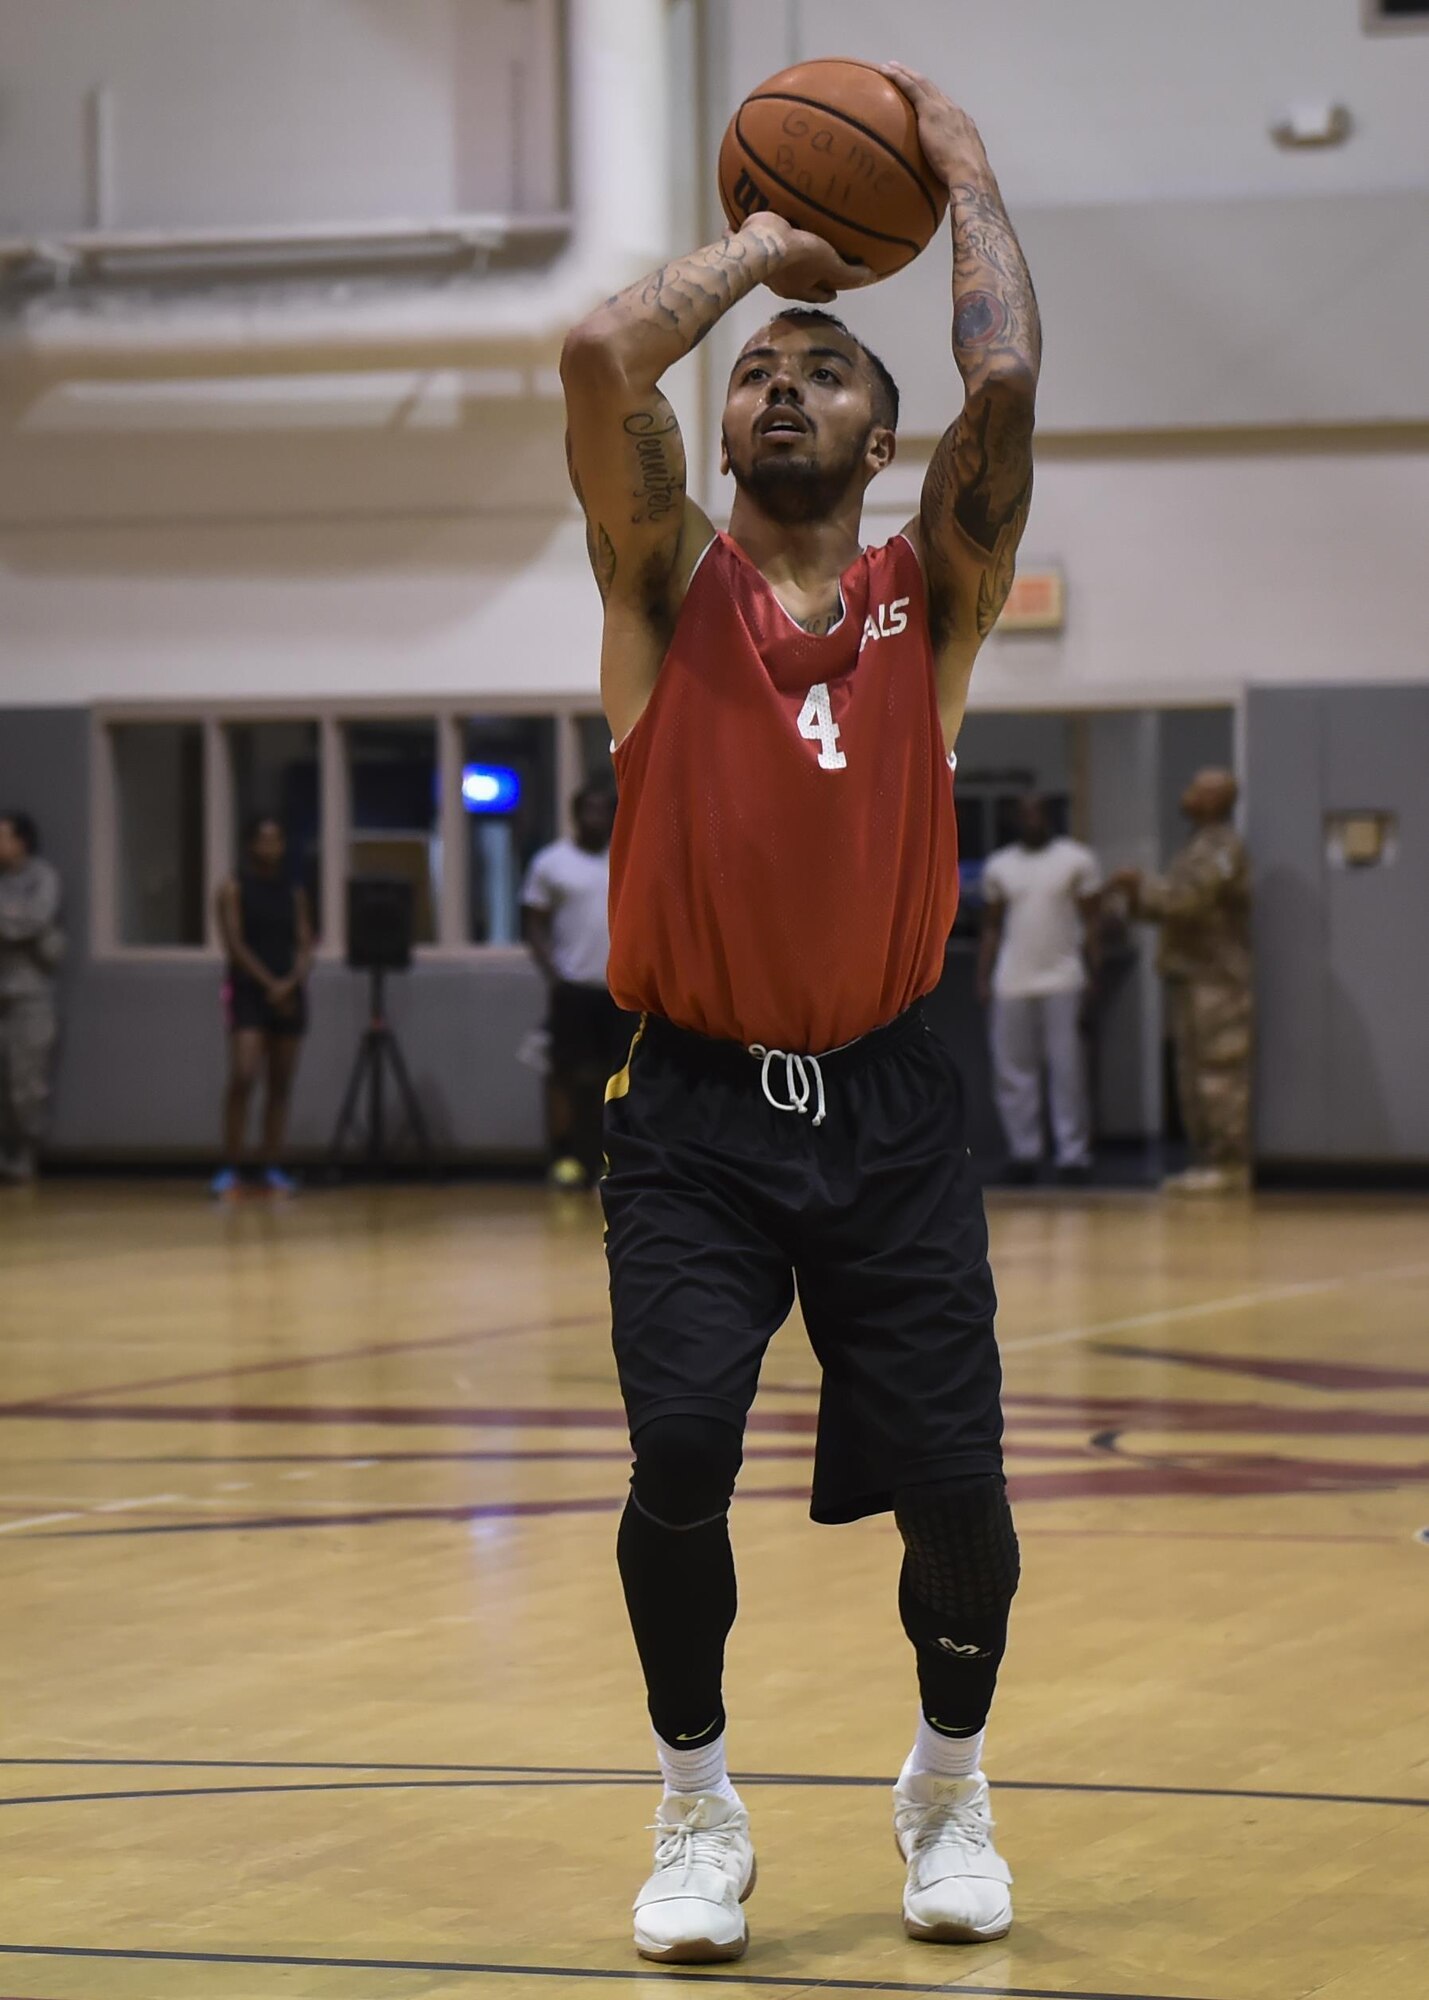 Lonnie Perrin, a member of the 1st Special Operations Medical Group basketball team, shoots a free throw during the intramural basketball championship at the Aderholt Fitness Center on Hurlburt Field, Fla., April 6, 2017. For eight weeks, 12 teams competing through a single-elimination tournament to qualify for the championship game. (U.S. Air Force photo by Airman 1st Class Joseph Pick)